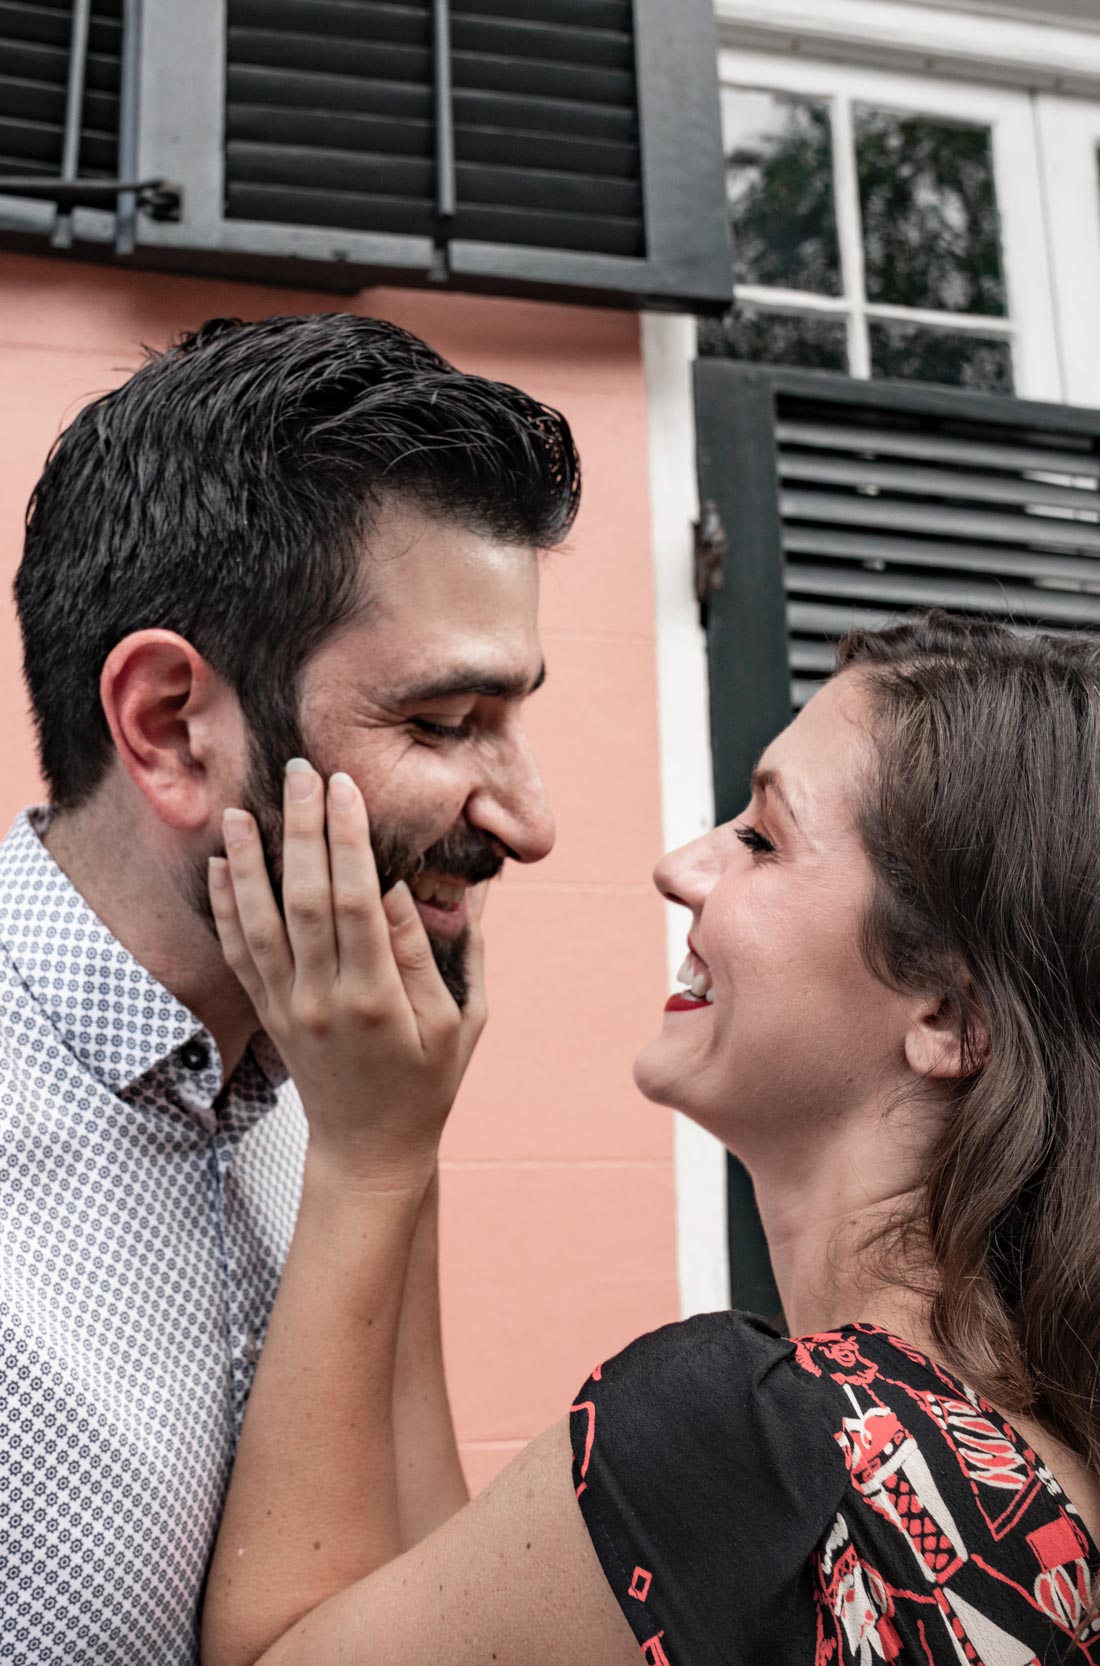 Woman playing with boyfriend’s beard and laughing in the New Orleans French Quarter